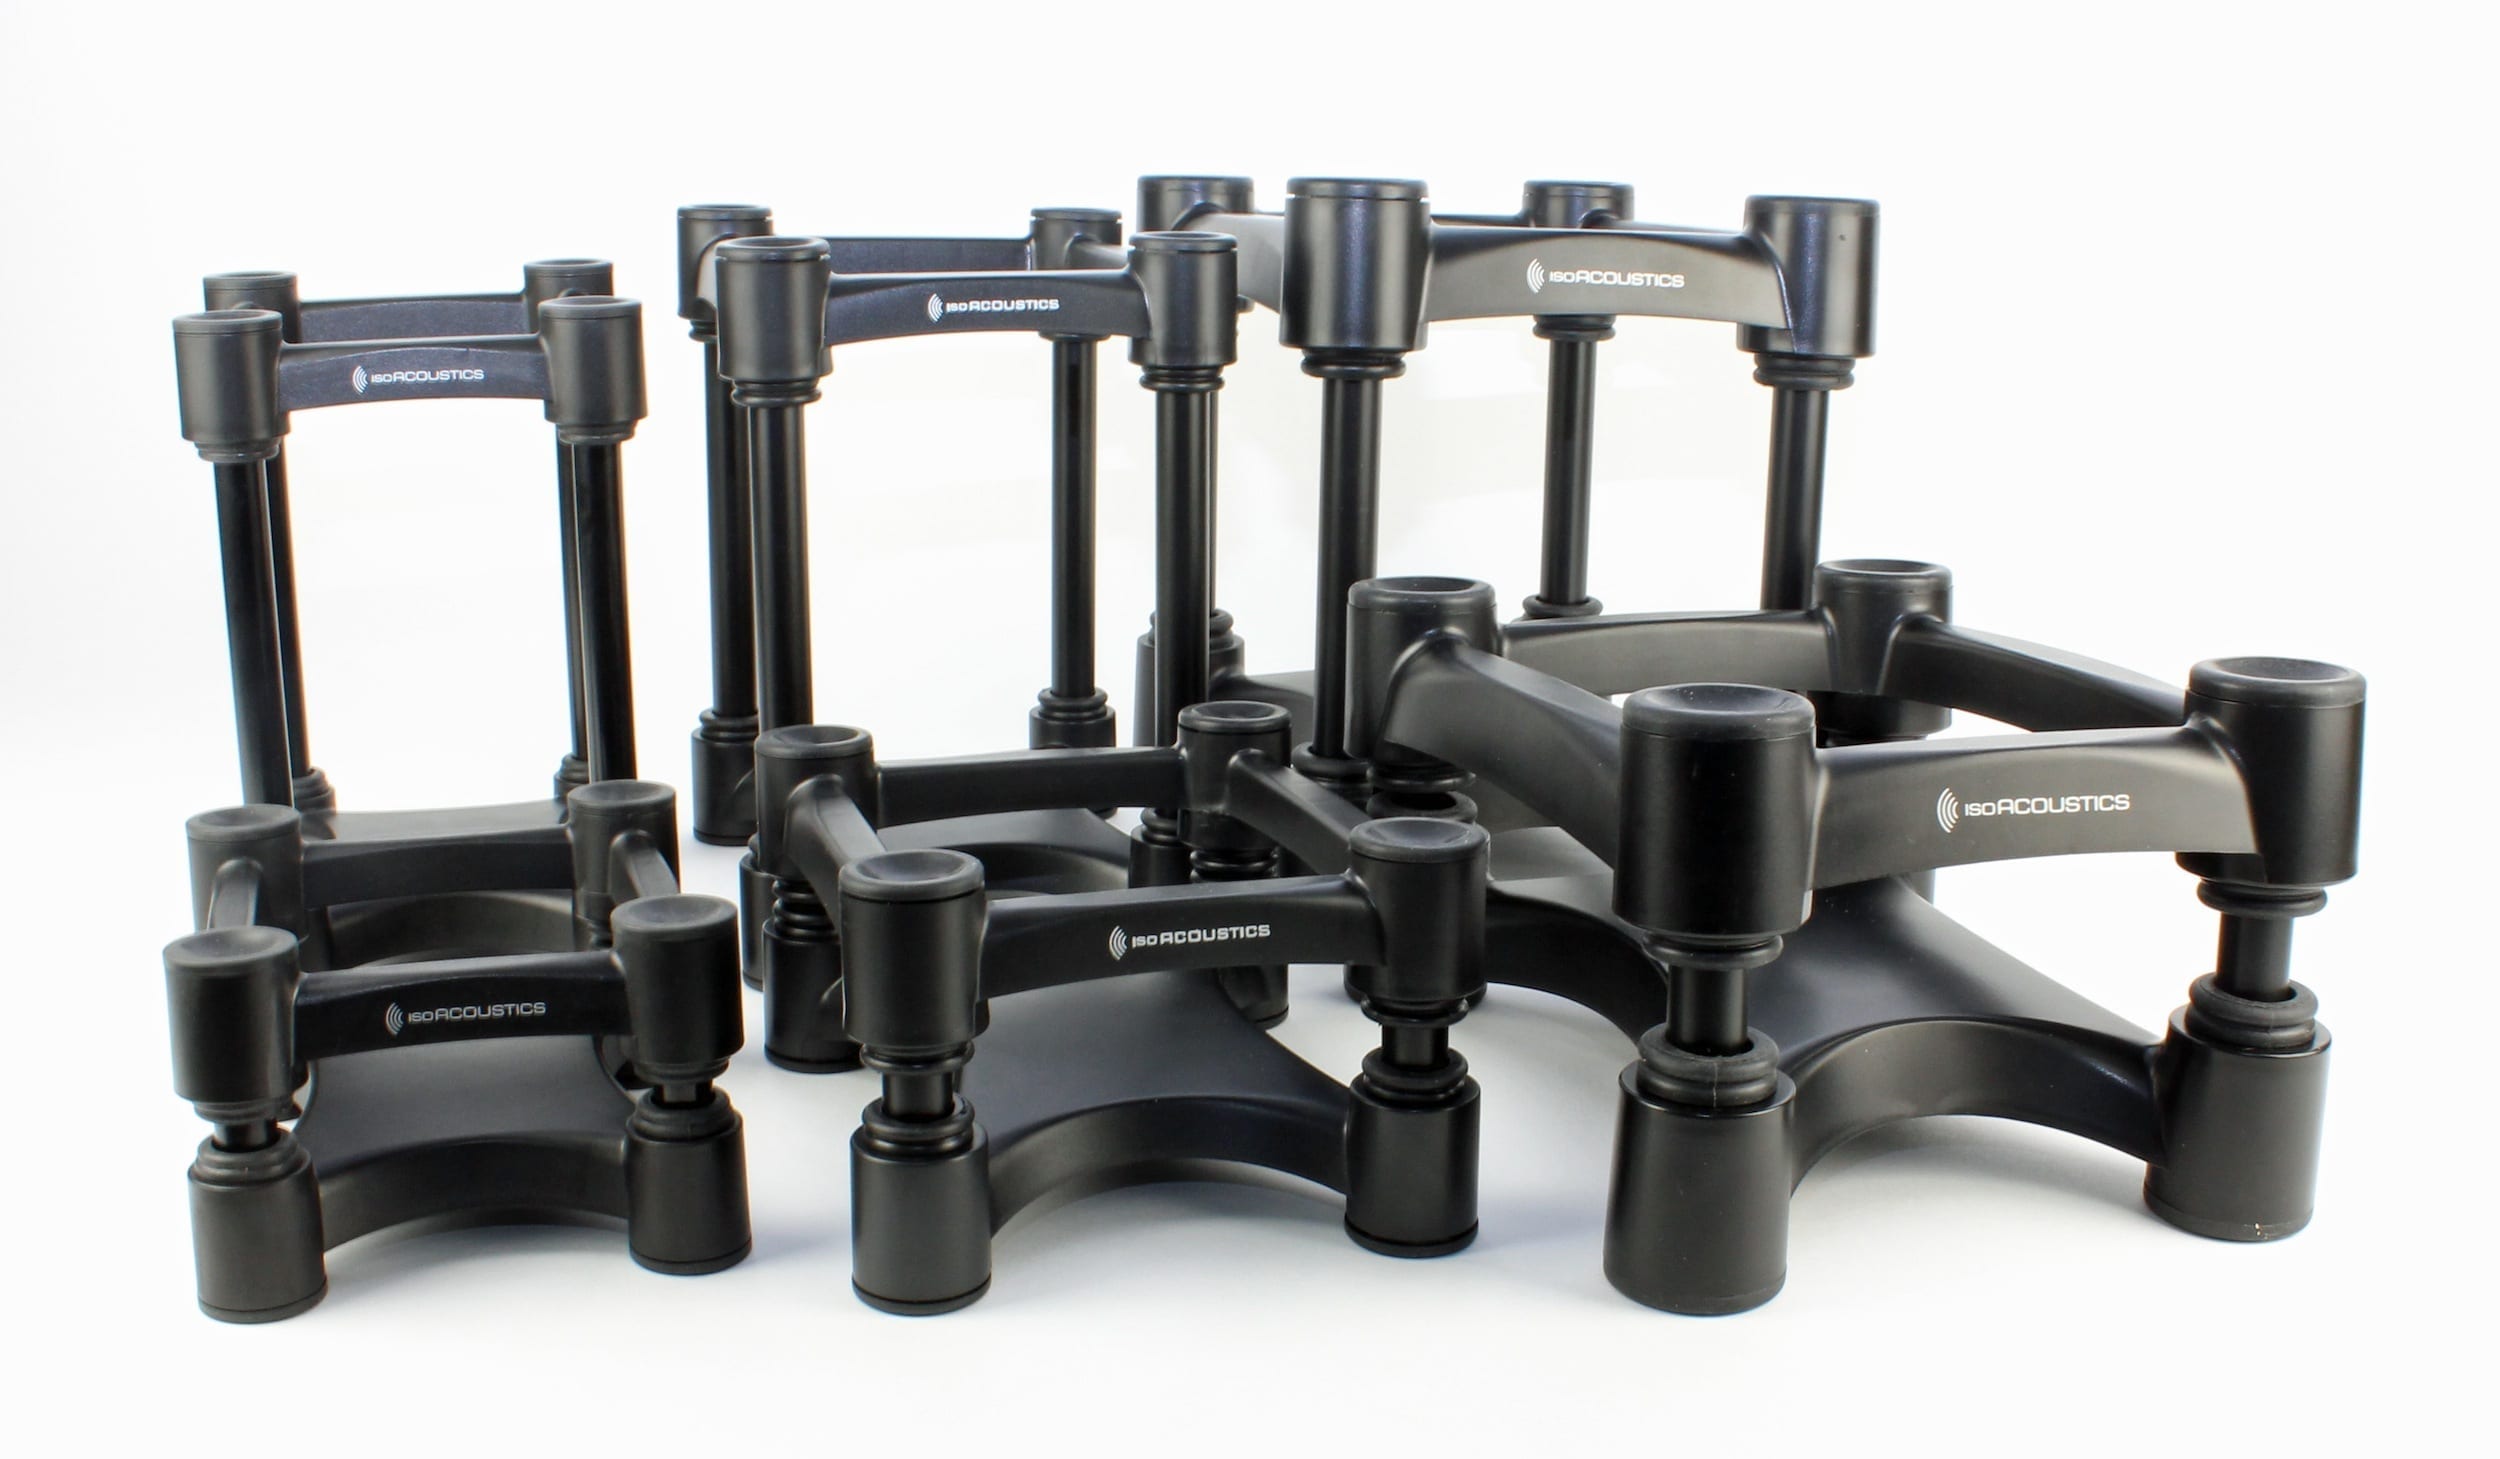 IsoAcoustics Iso-Stand Series Speaker Isolation Stands with Height & Tilt  Adjustment: Iso-130 (5.1 x 6”) Pair